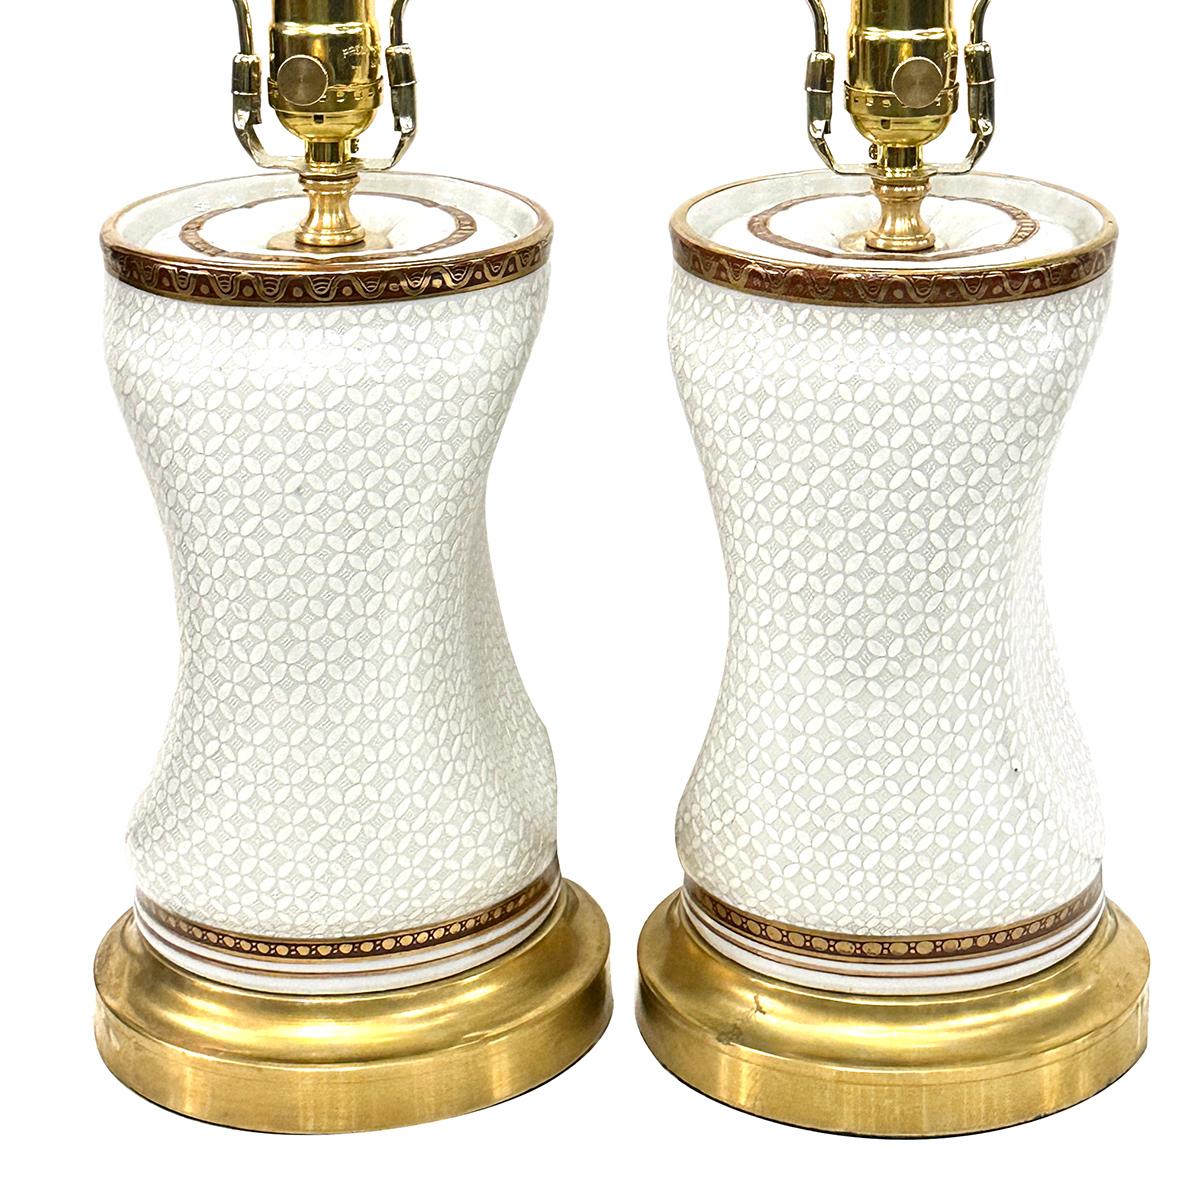 Pair of circa 1920's French porcelain lamps with gilt details.

Measurements:
Height of body: 12